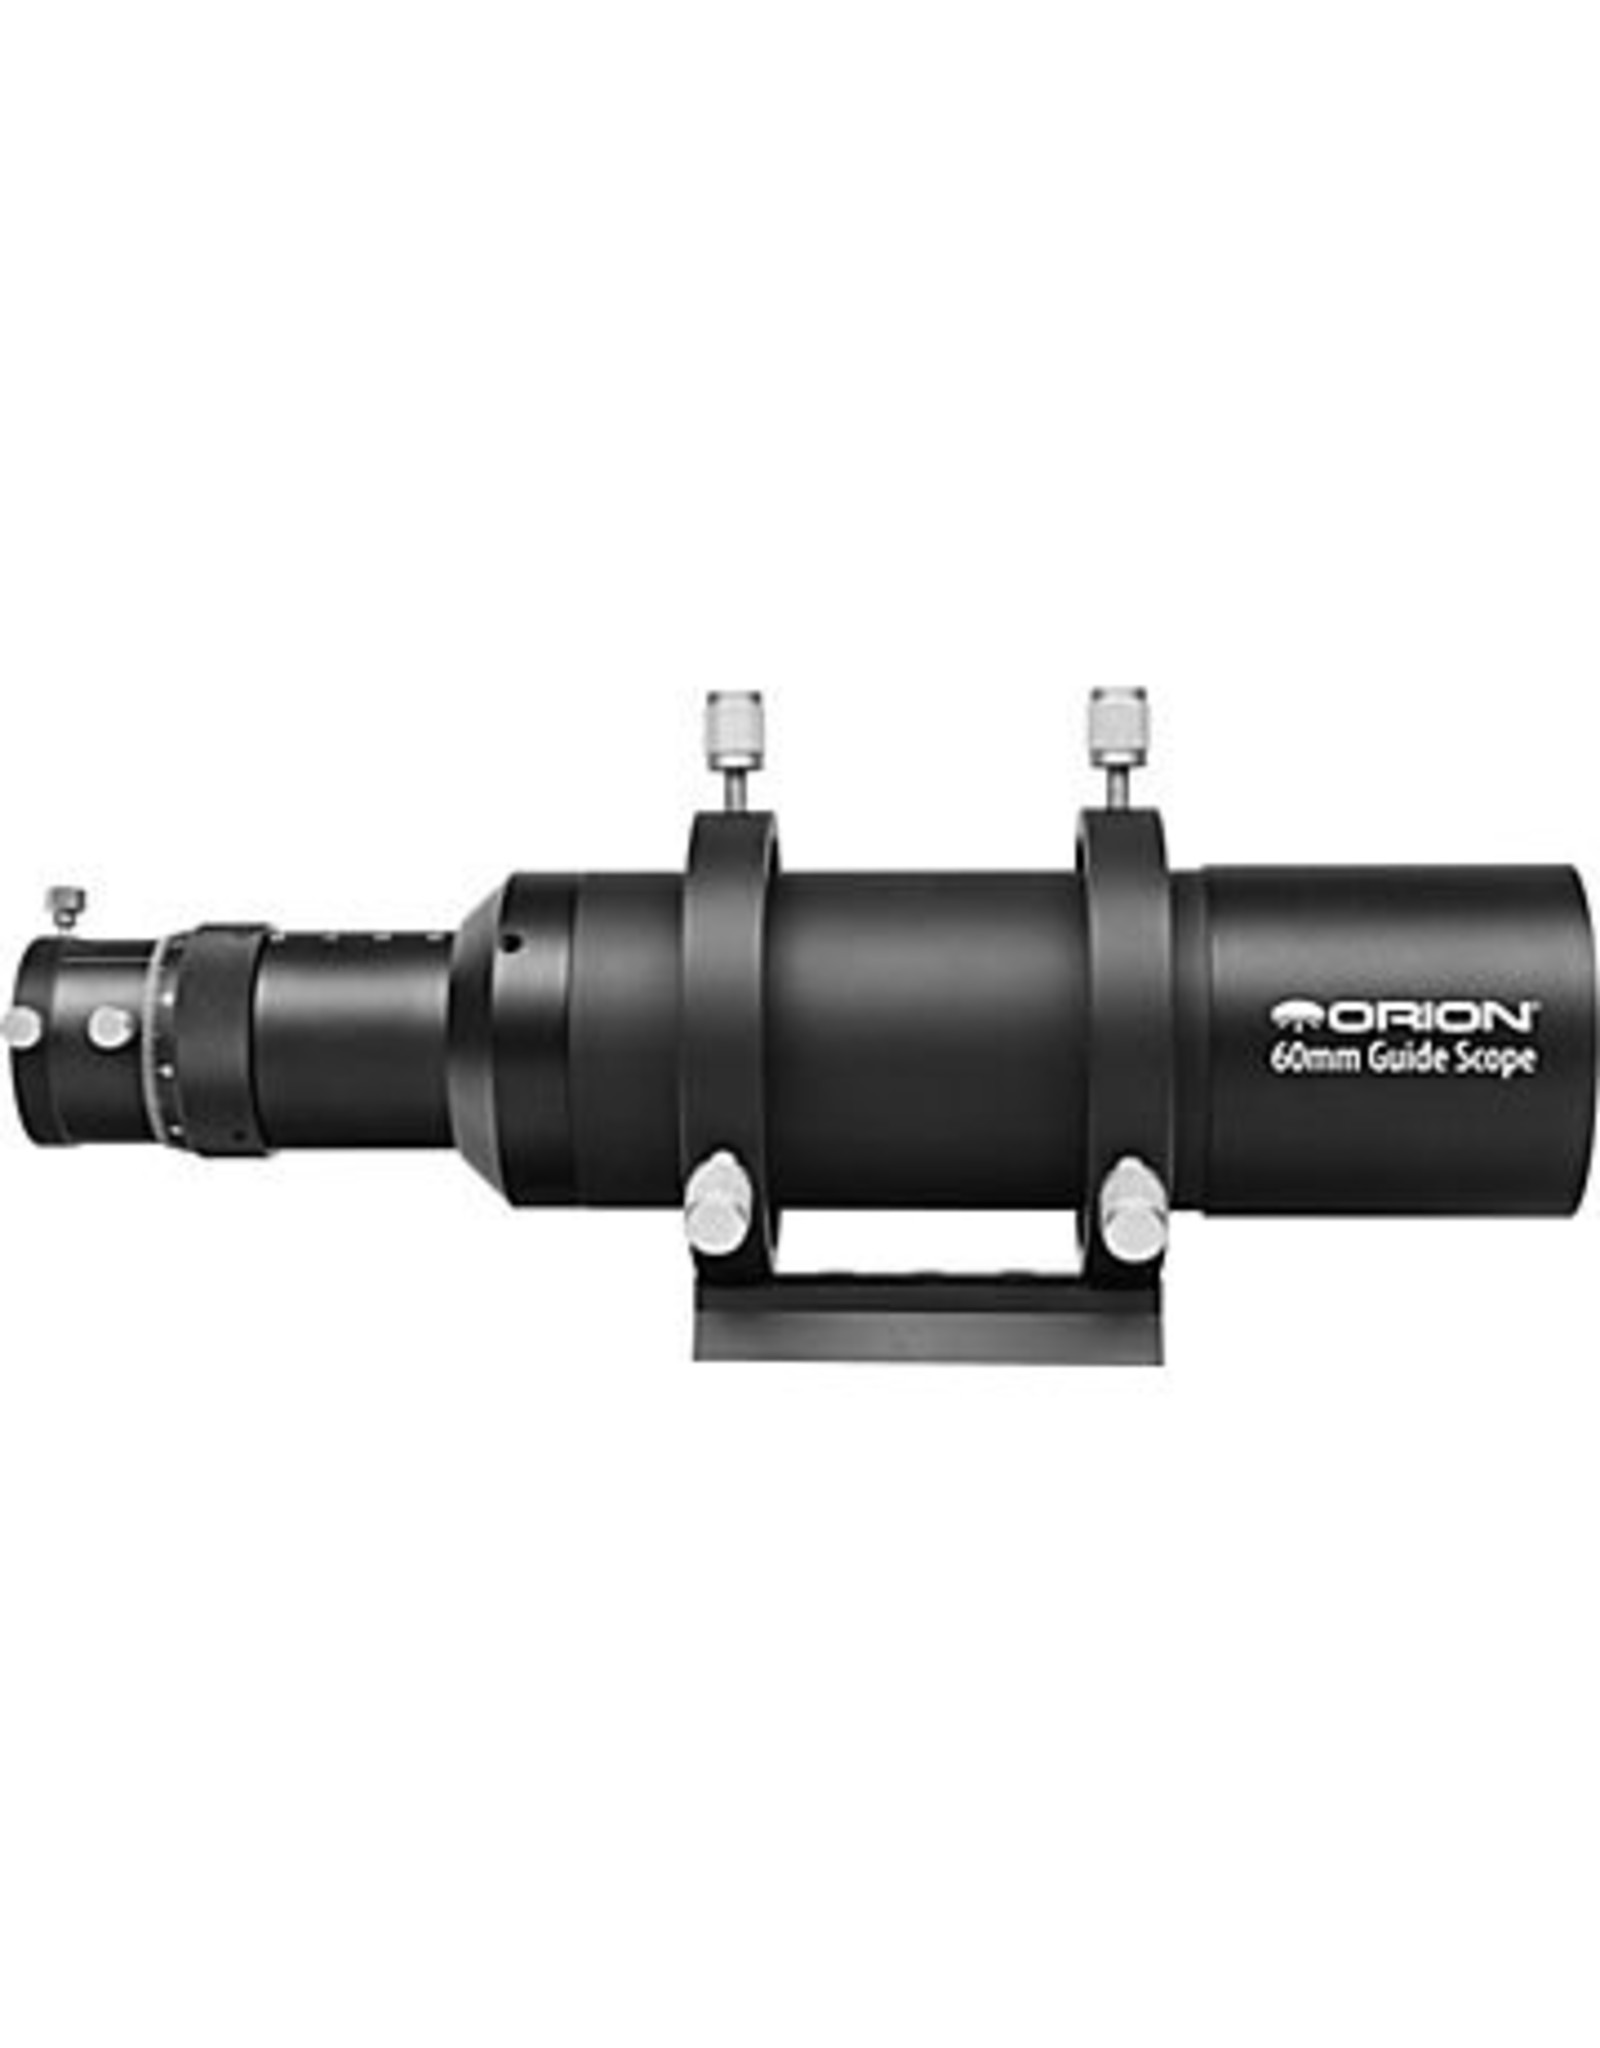 Orion 60mm Multi-Use Guide Scope with Helical Focuser 